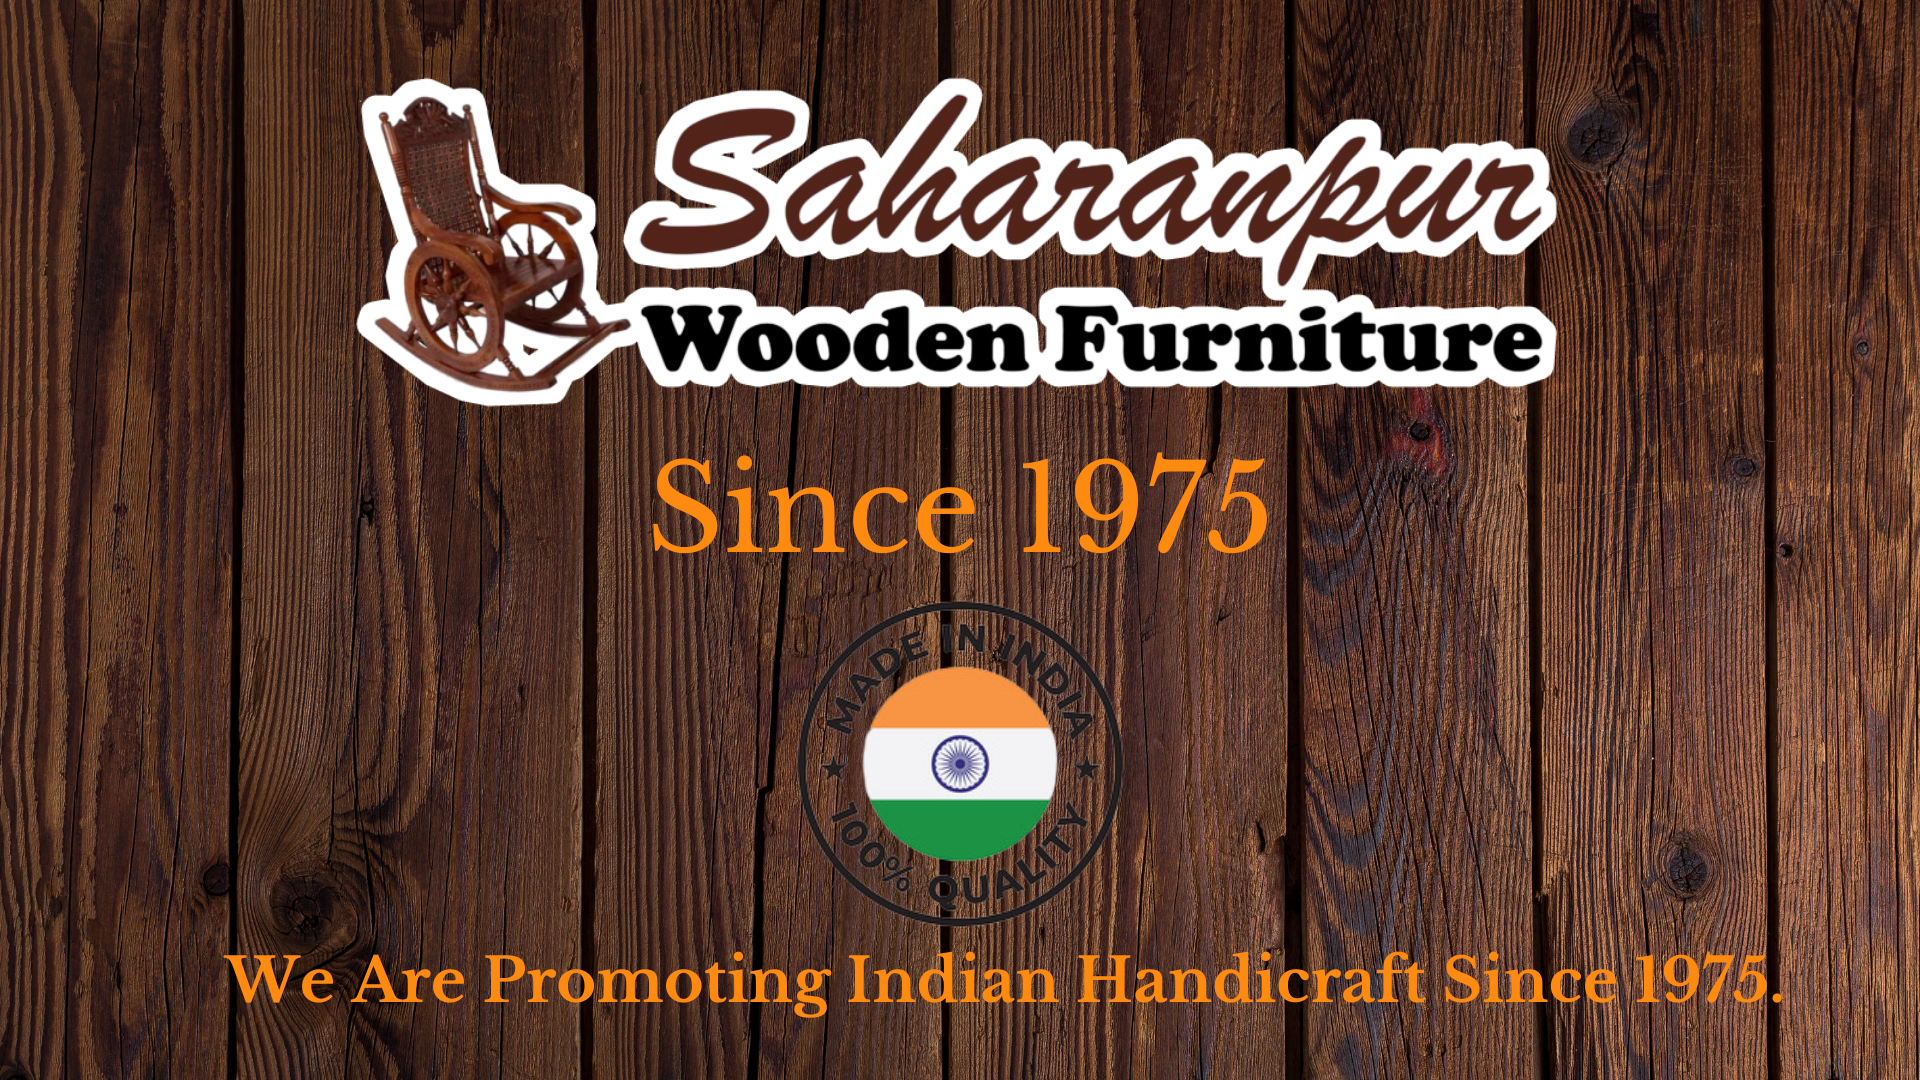 About Saharanpur Wooden Furniture